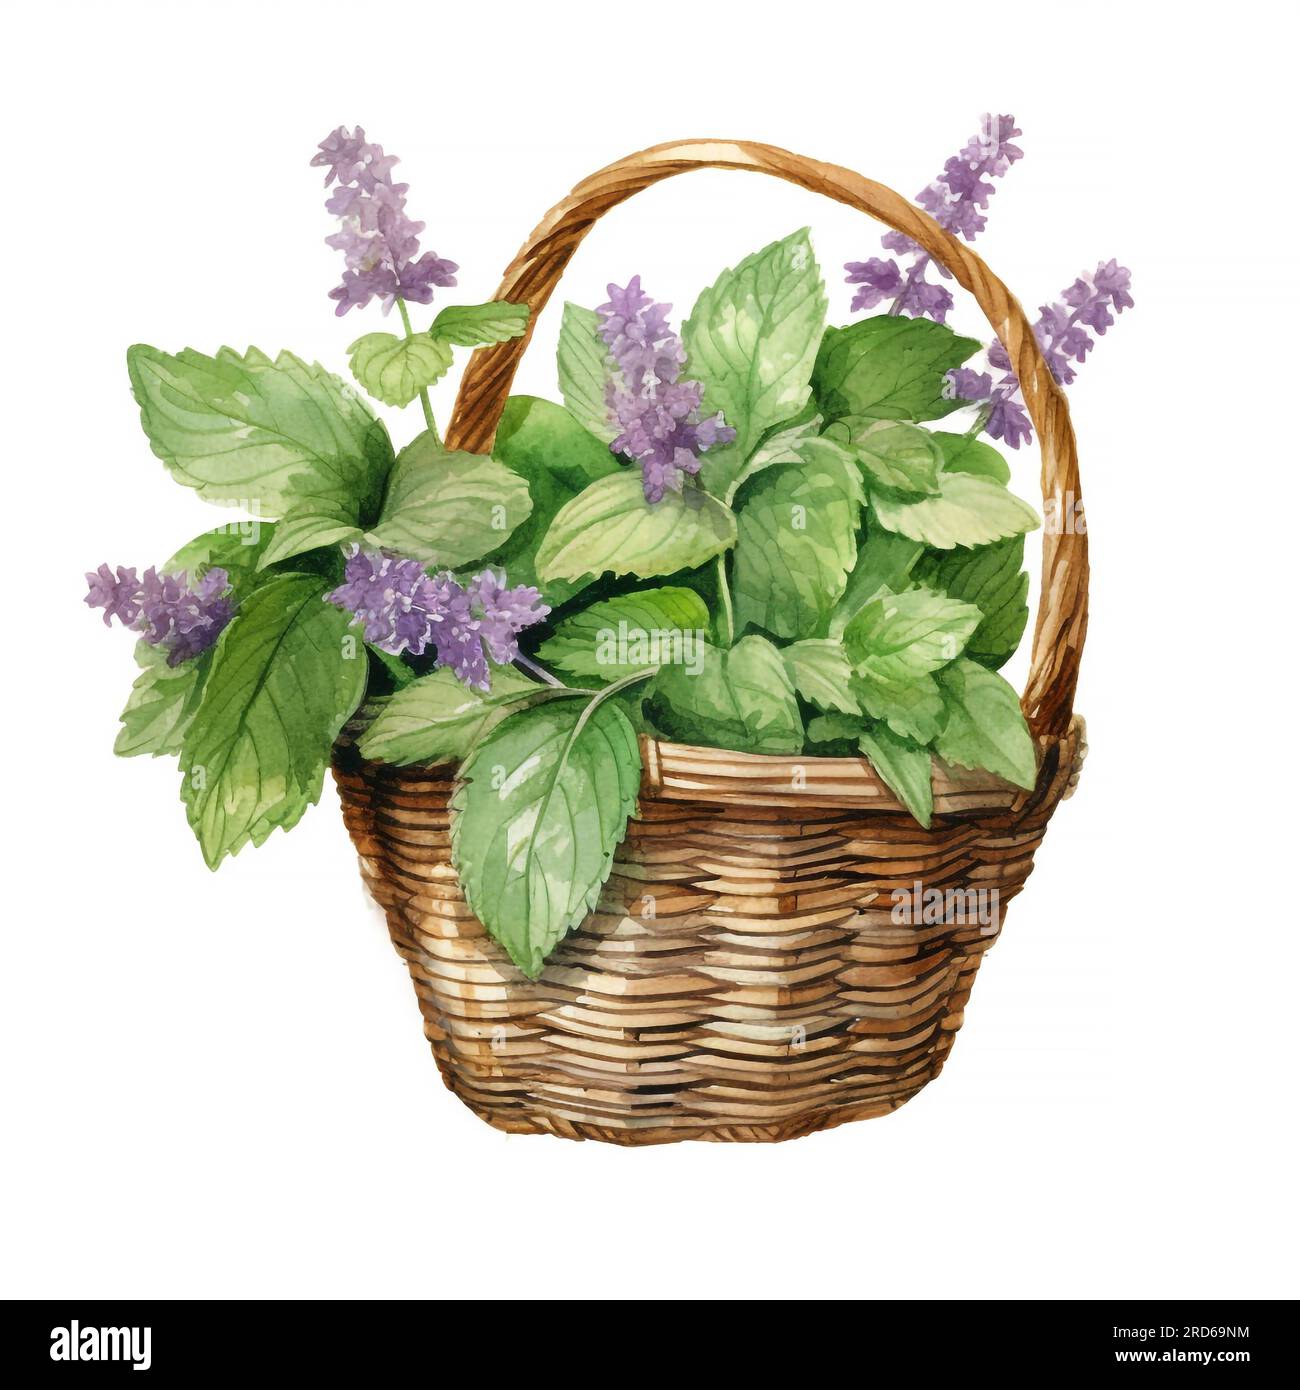 Patchouli or Pogostemon cablini in basket Hand drawn watercolor illustration isolated on white background Stock Photo